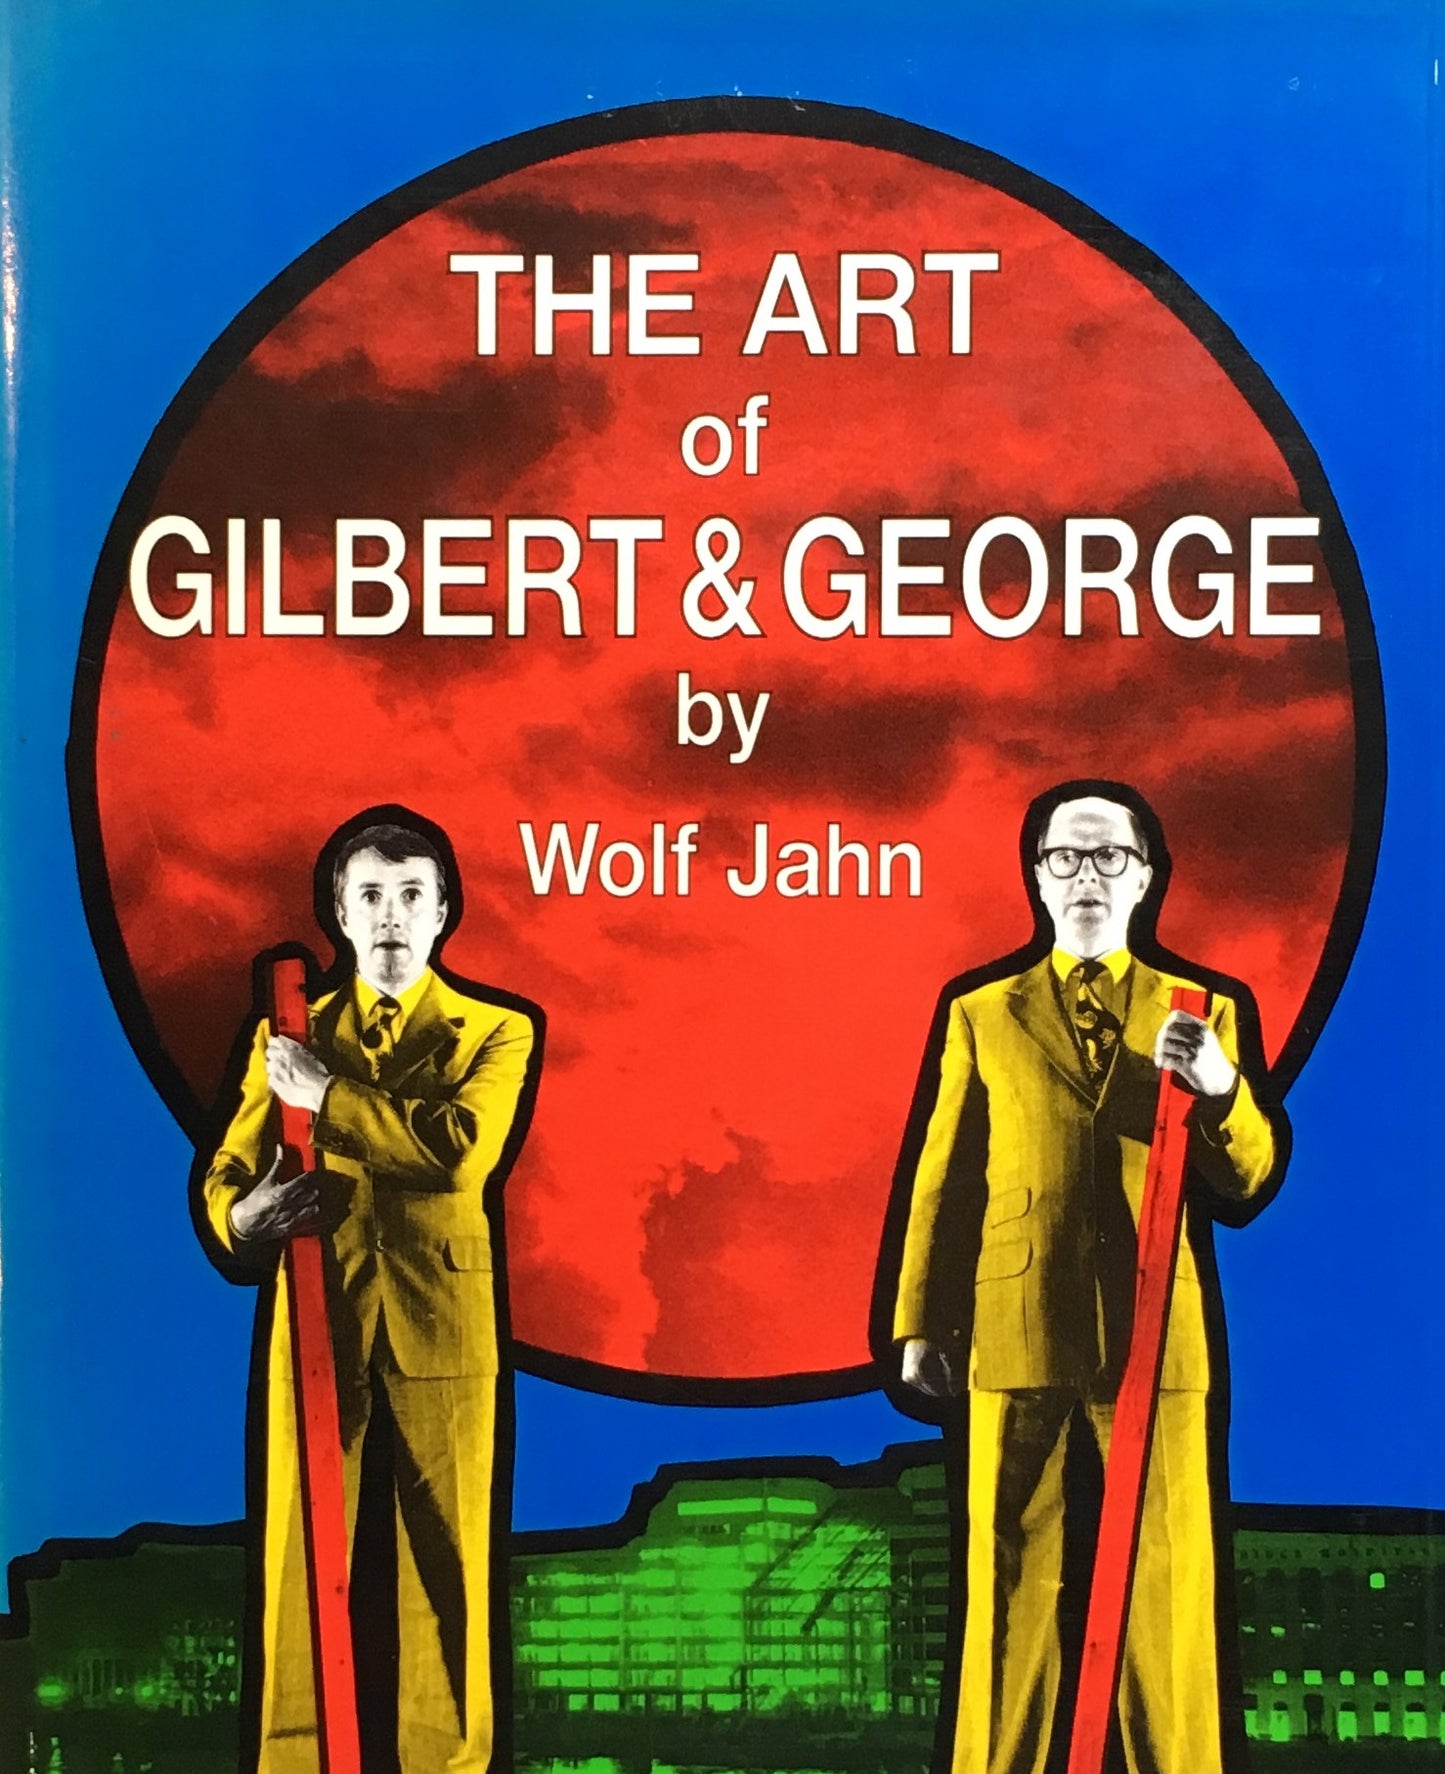 THE ART OF GILBERT & GEORGE  by Wolf Jahn